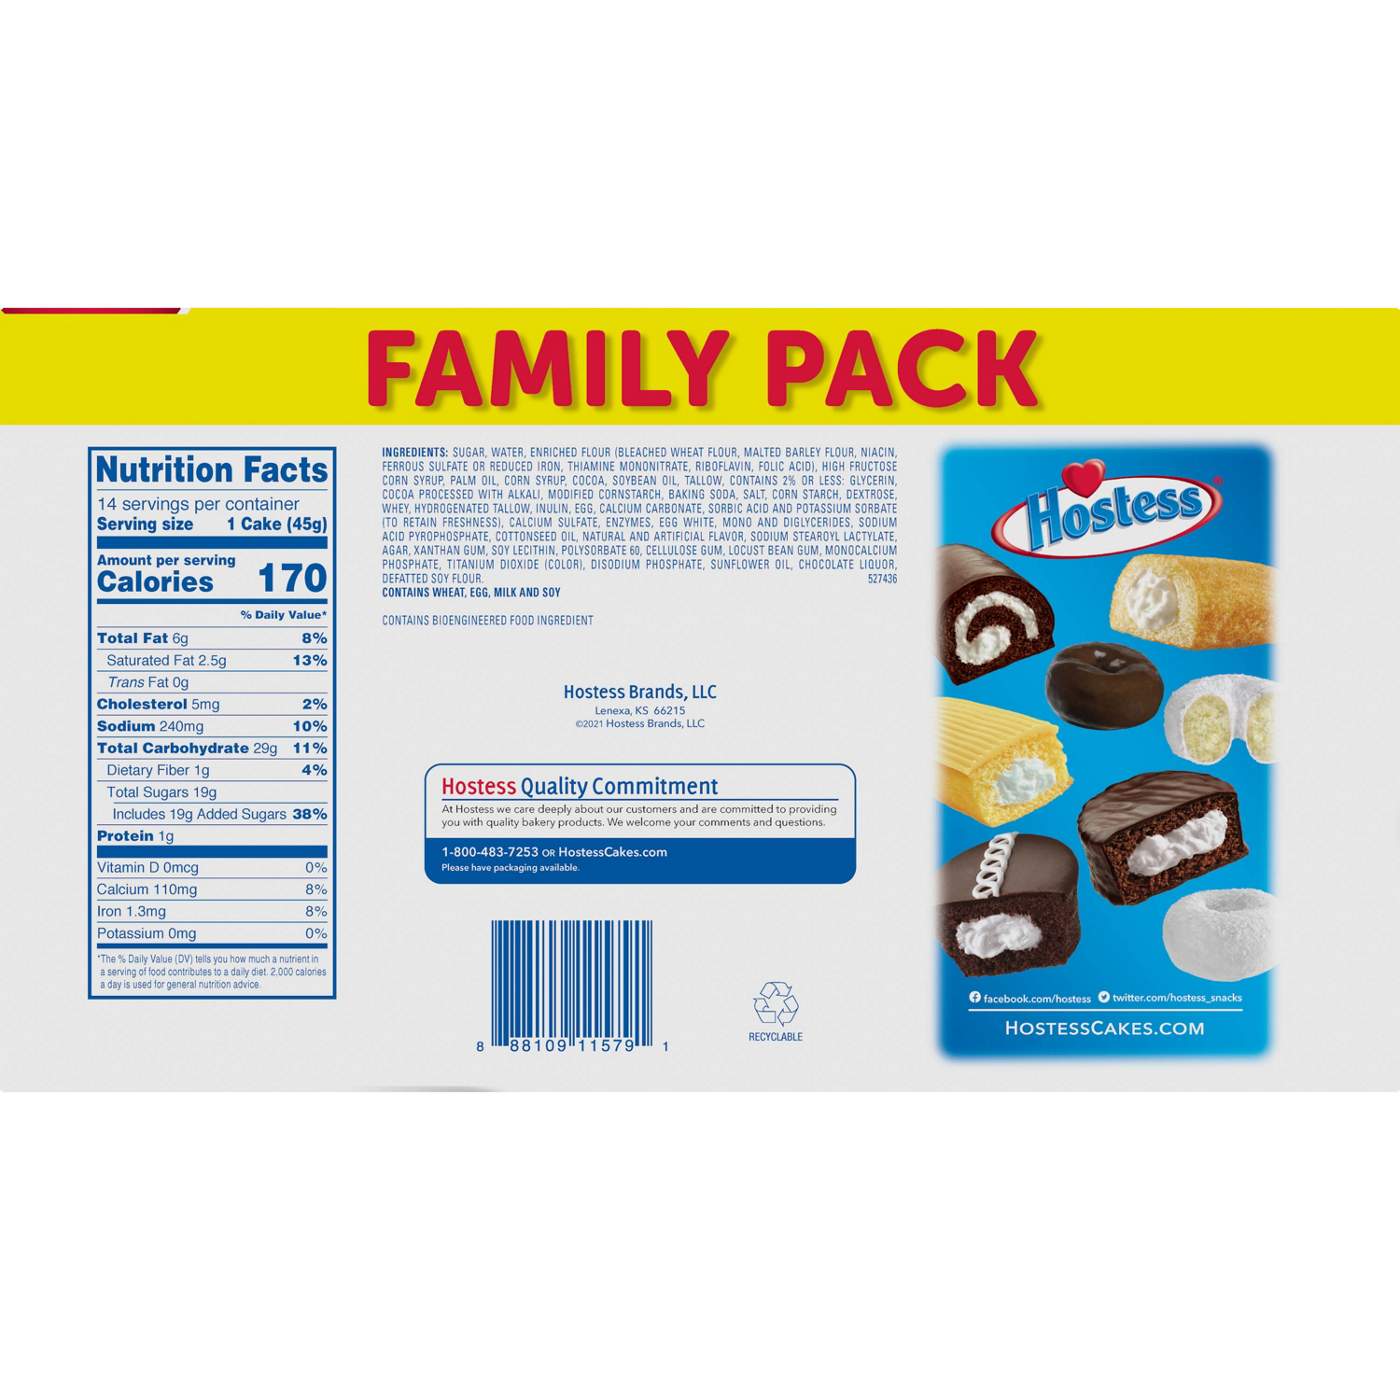 Hostess Chocolate Cupcakes - Family Pack; image 3 of 4